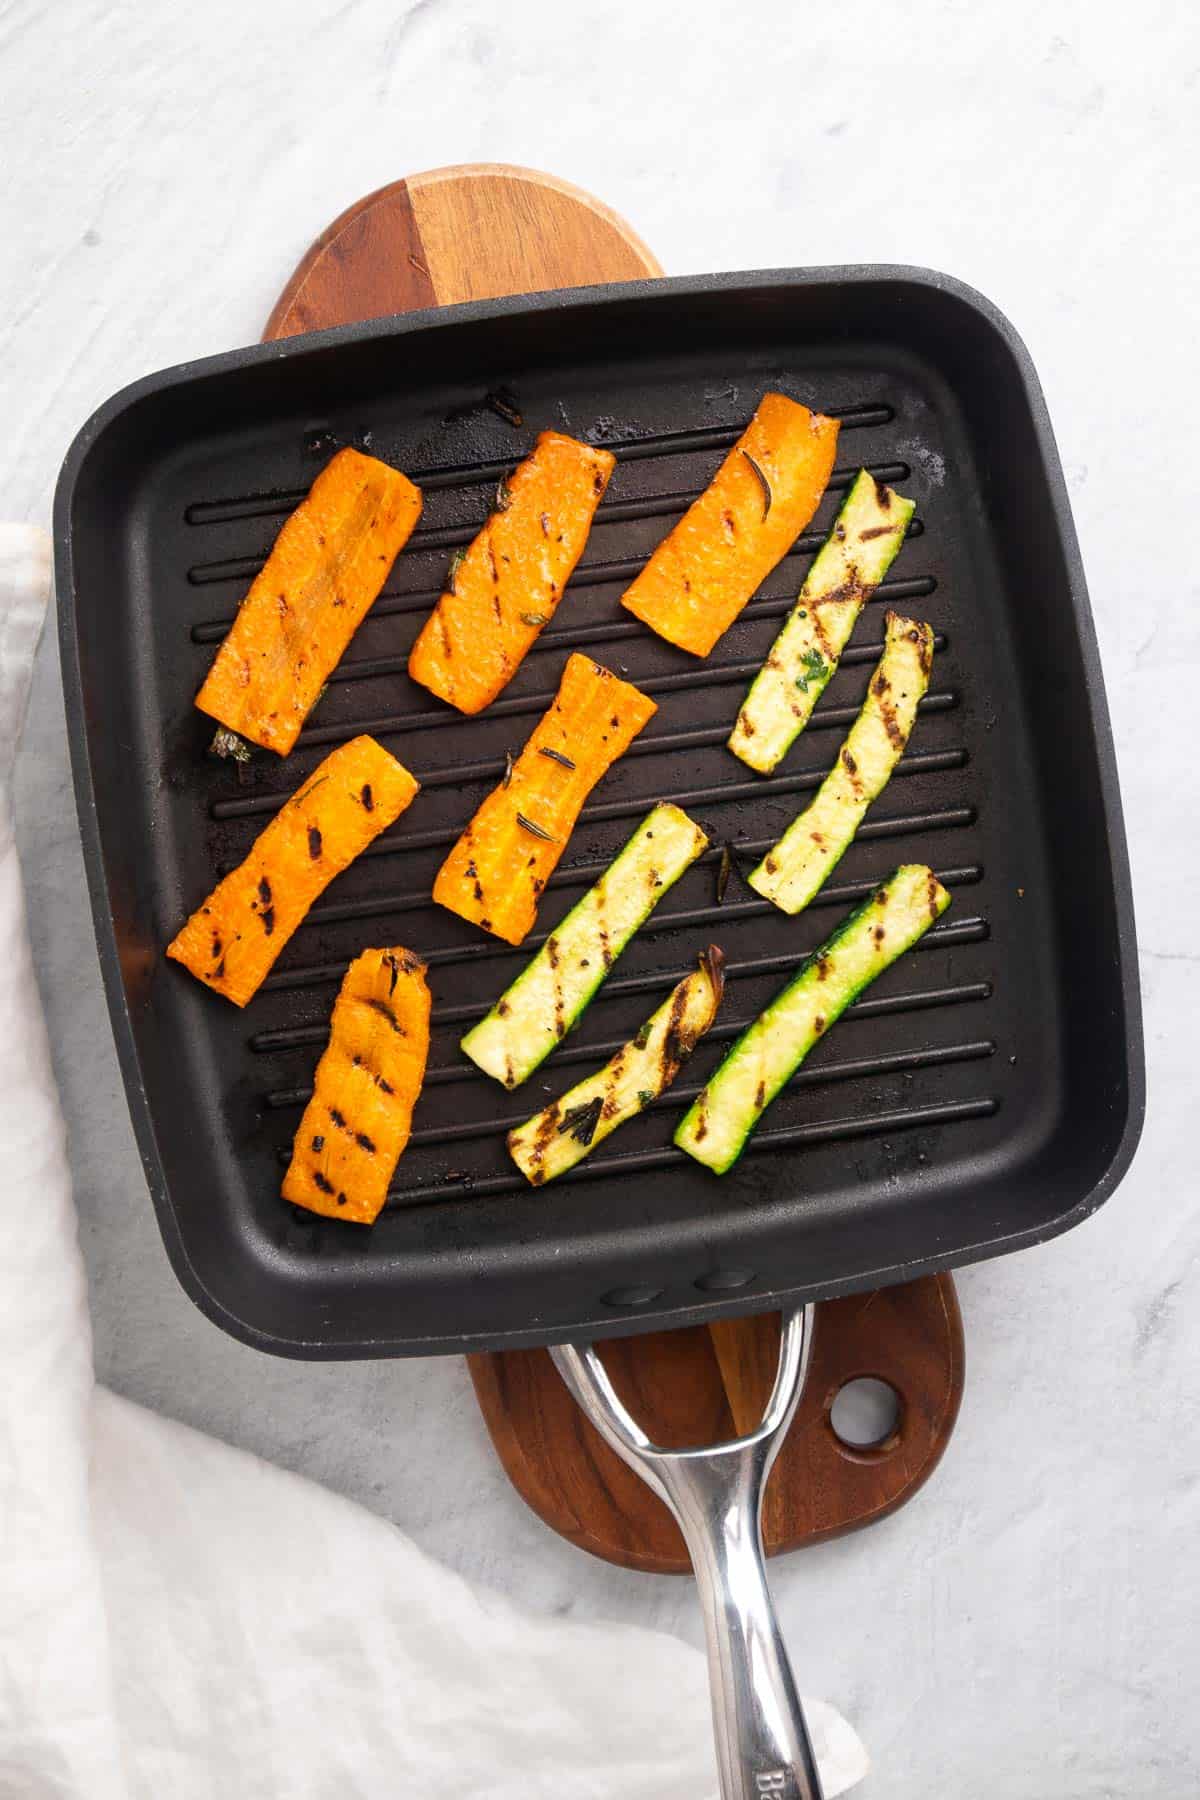 Sliced veggies on the grill pan with visible grill marks, as seen from above